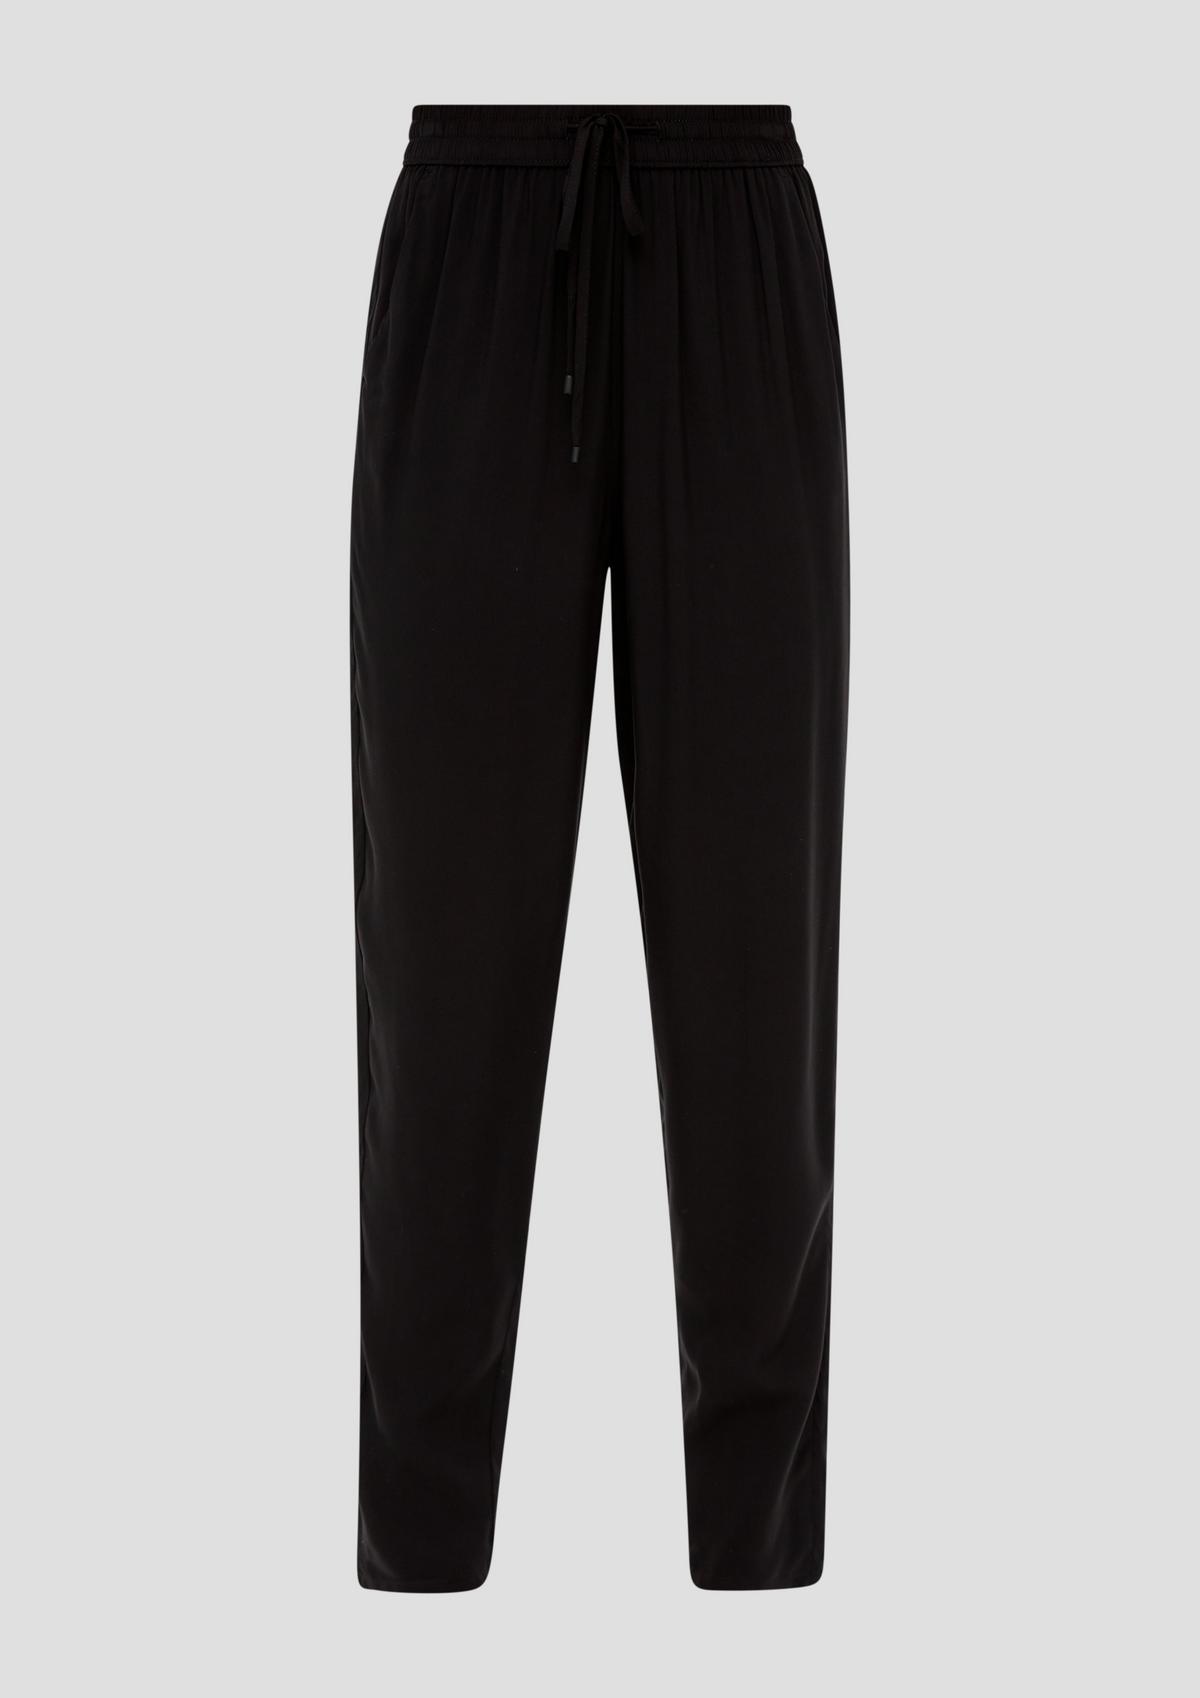 s.Oliver Ankle-length trousers made of pure viscose